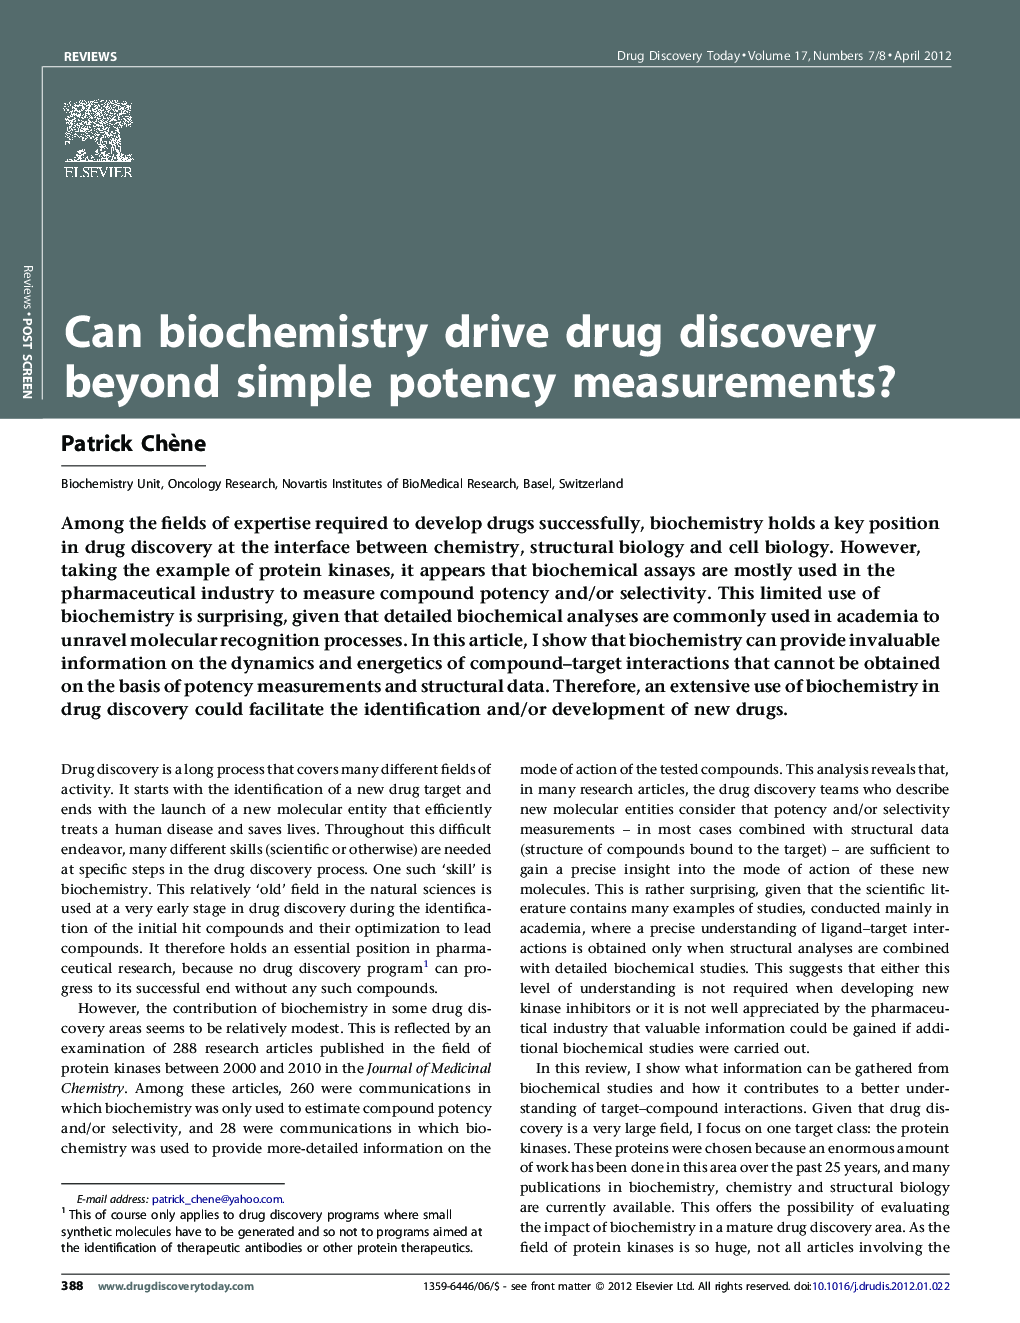 Can biochemistry drive drug discovery beyond simple potency measurements?